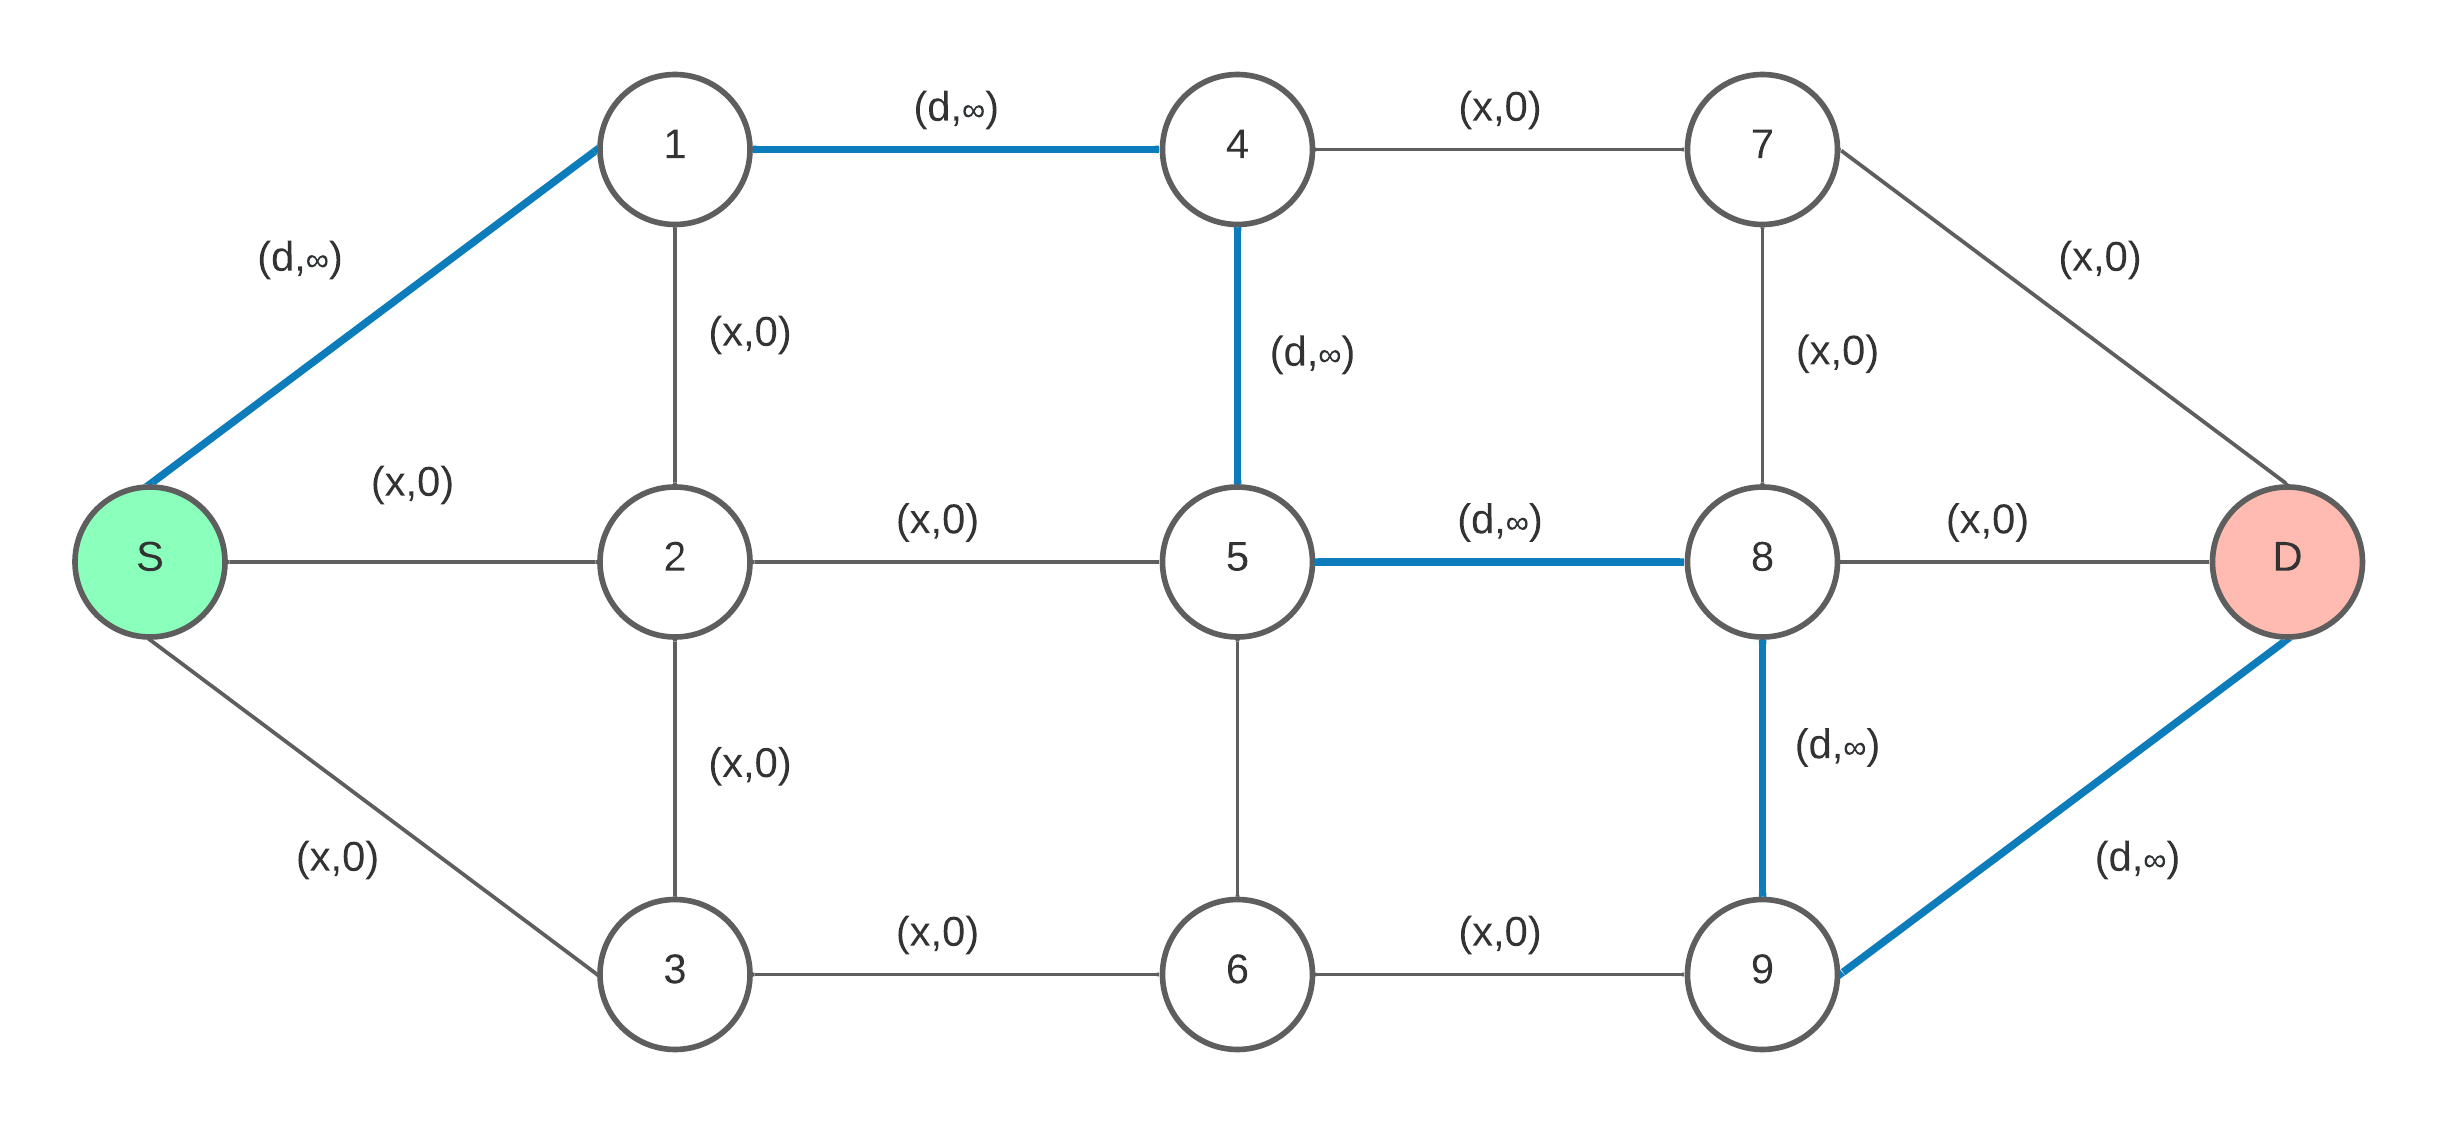 Example of a graph in which each k link has two types of cost: (f_{1}^{k}, f_{2}^{k}).